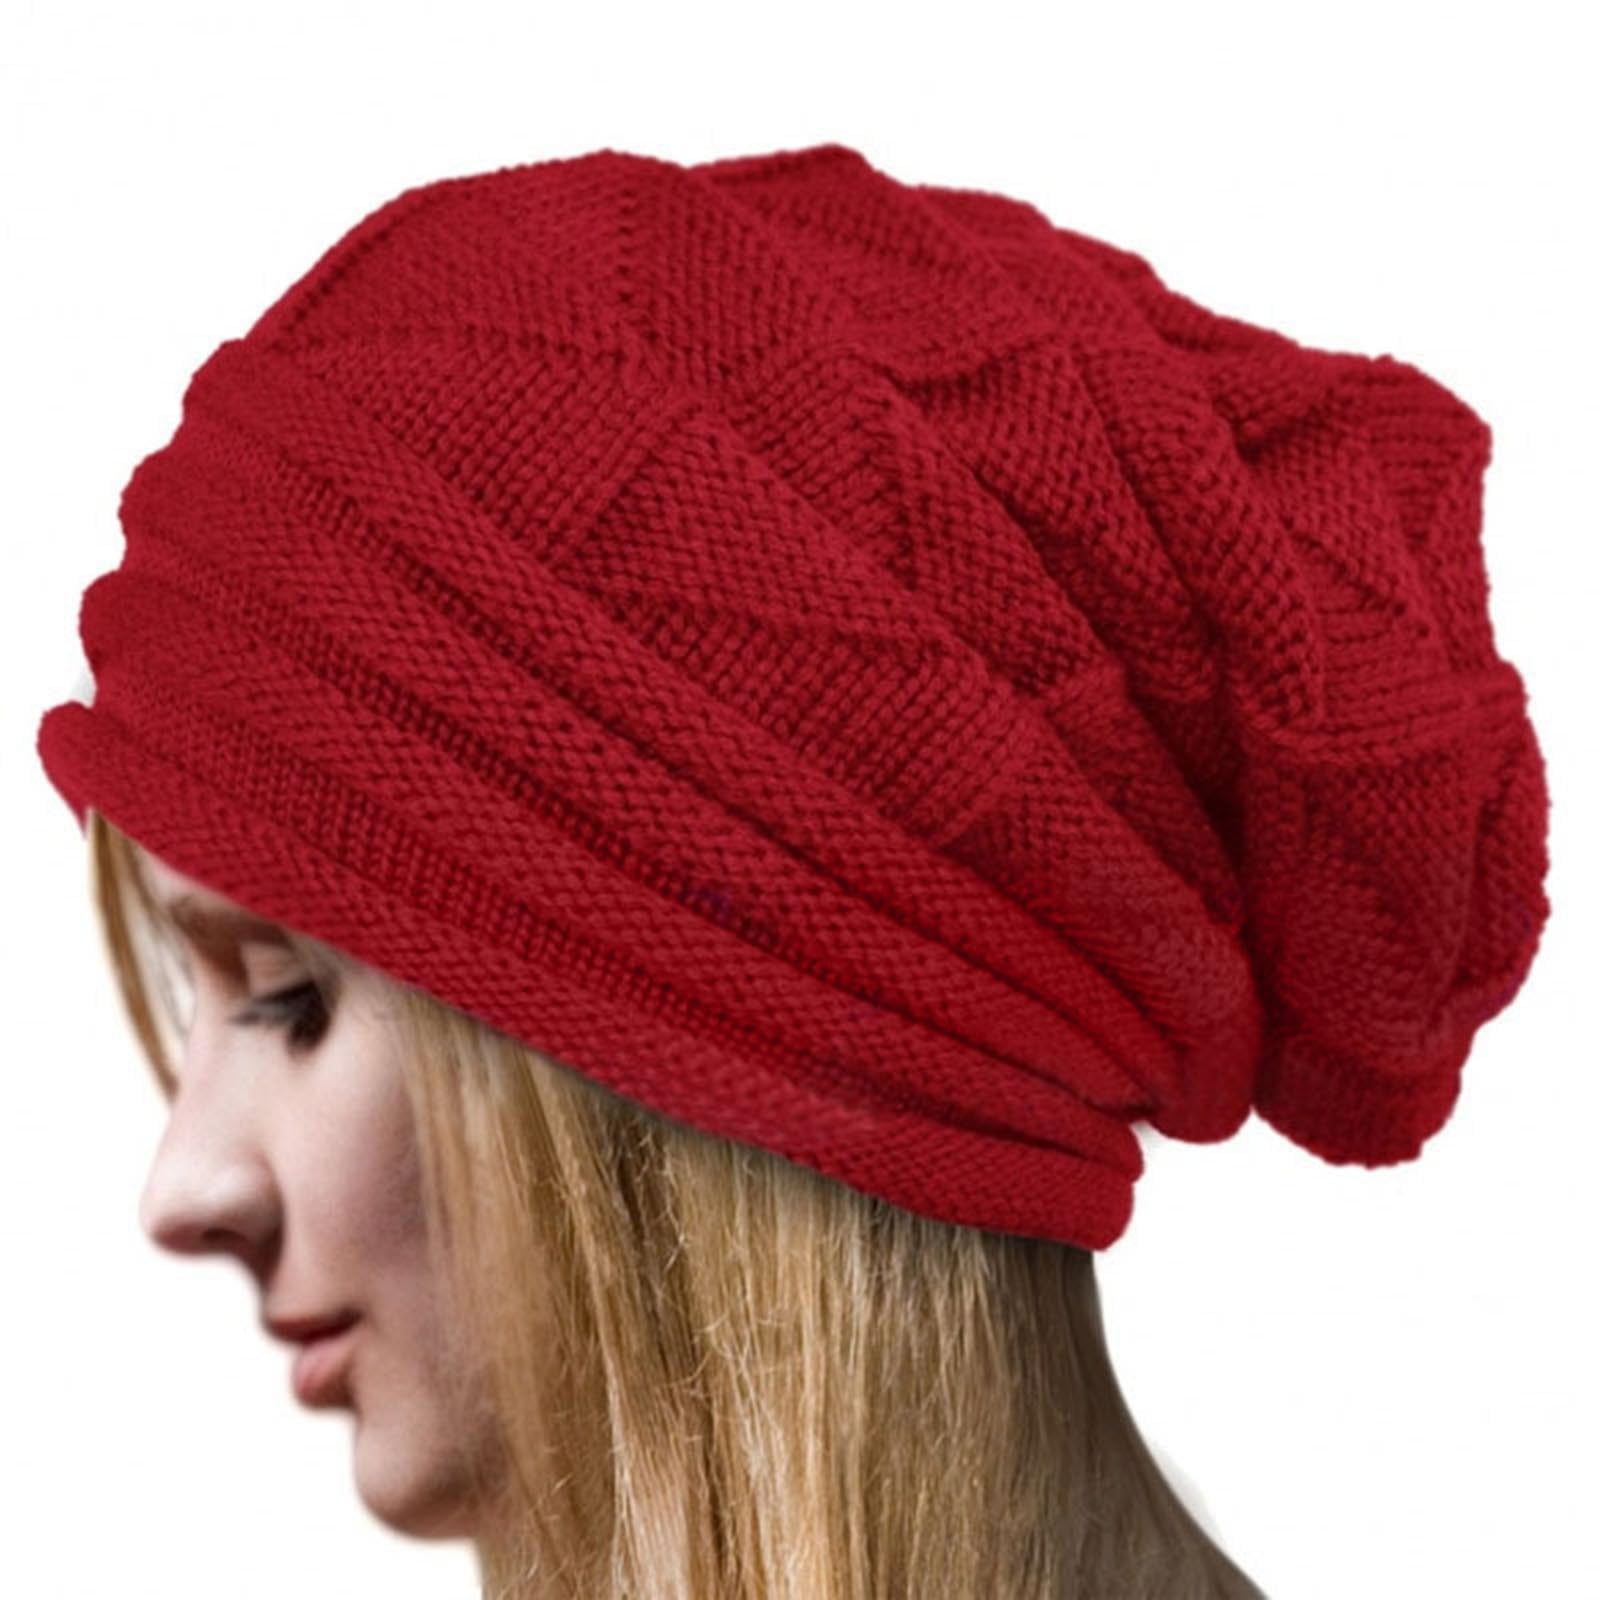 KDDYLITQ Beanie Pom Poms Balls Christmas Hats for Women Cable Knit